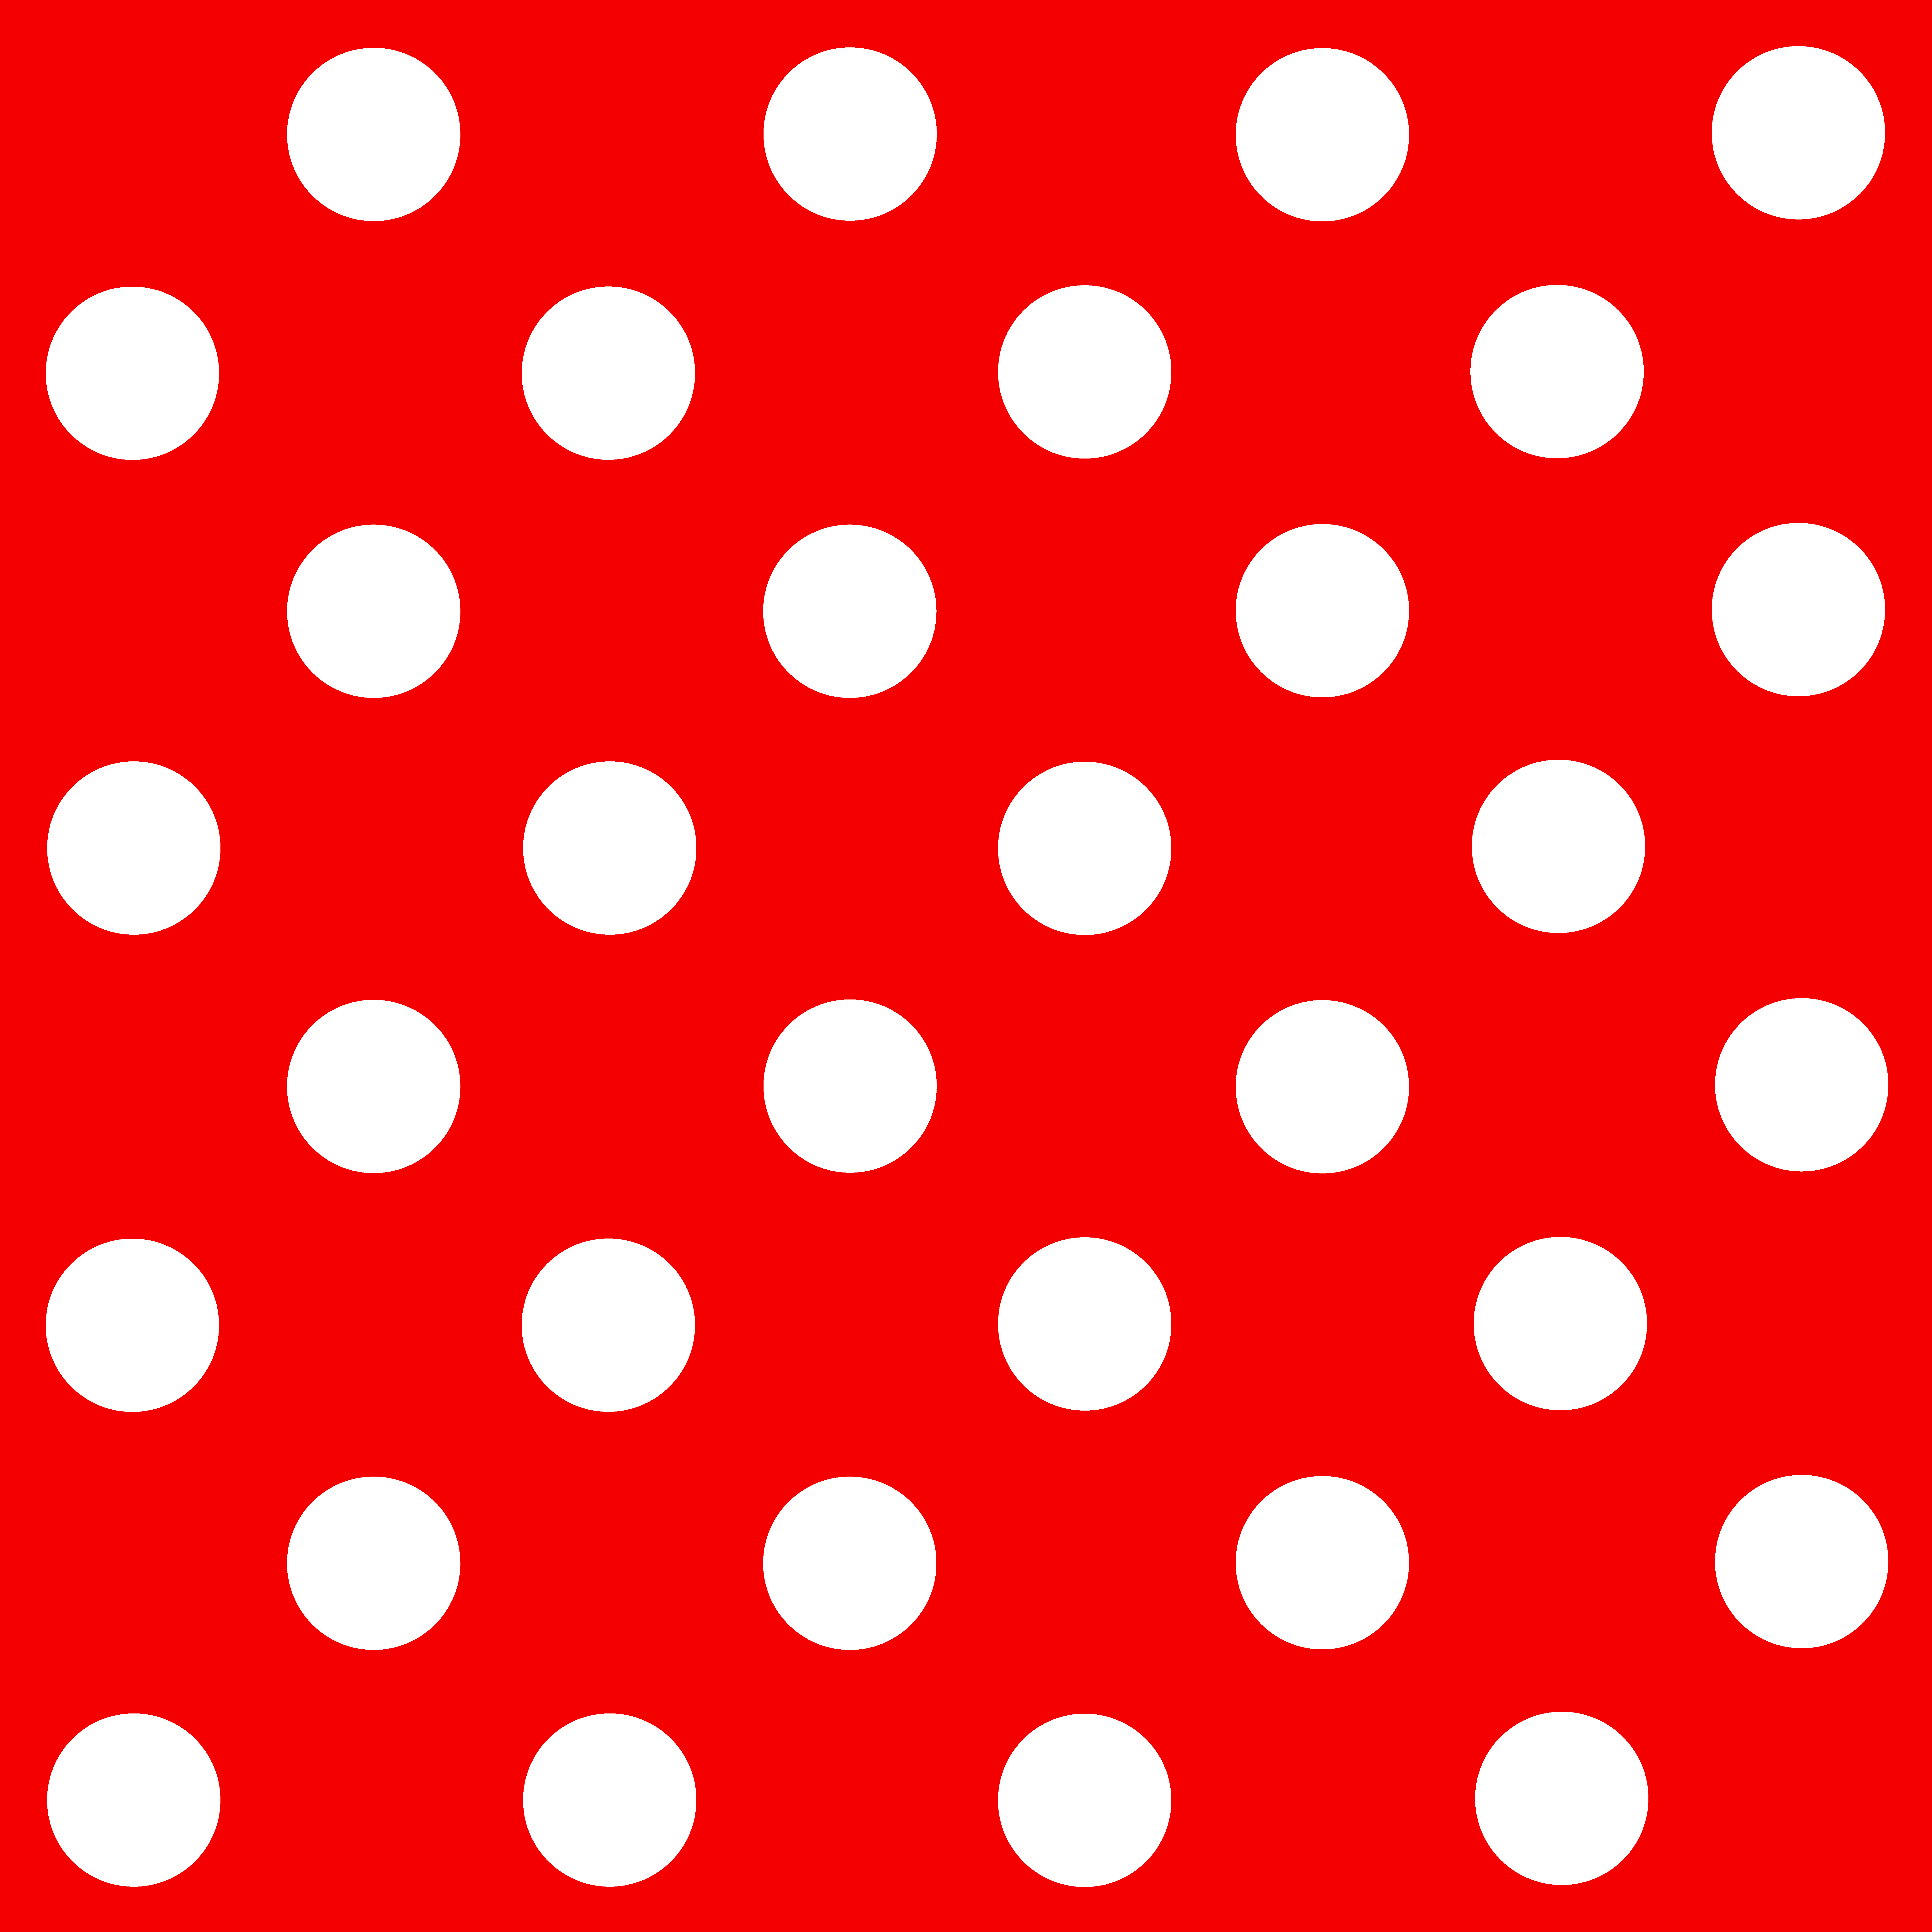 Red and White Polka Dot Pattern